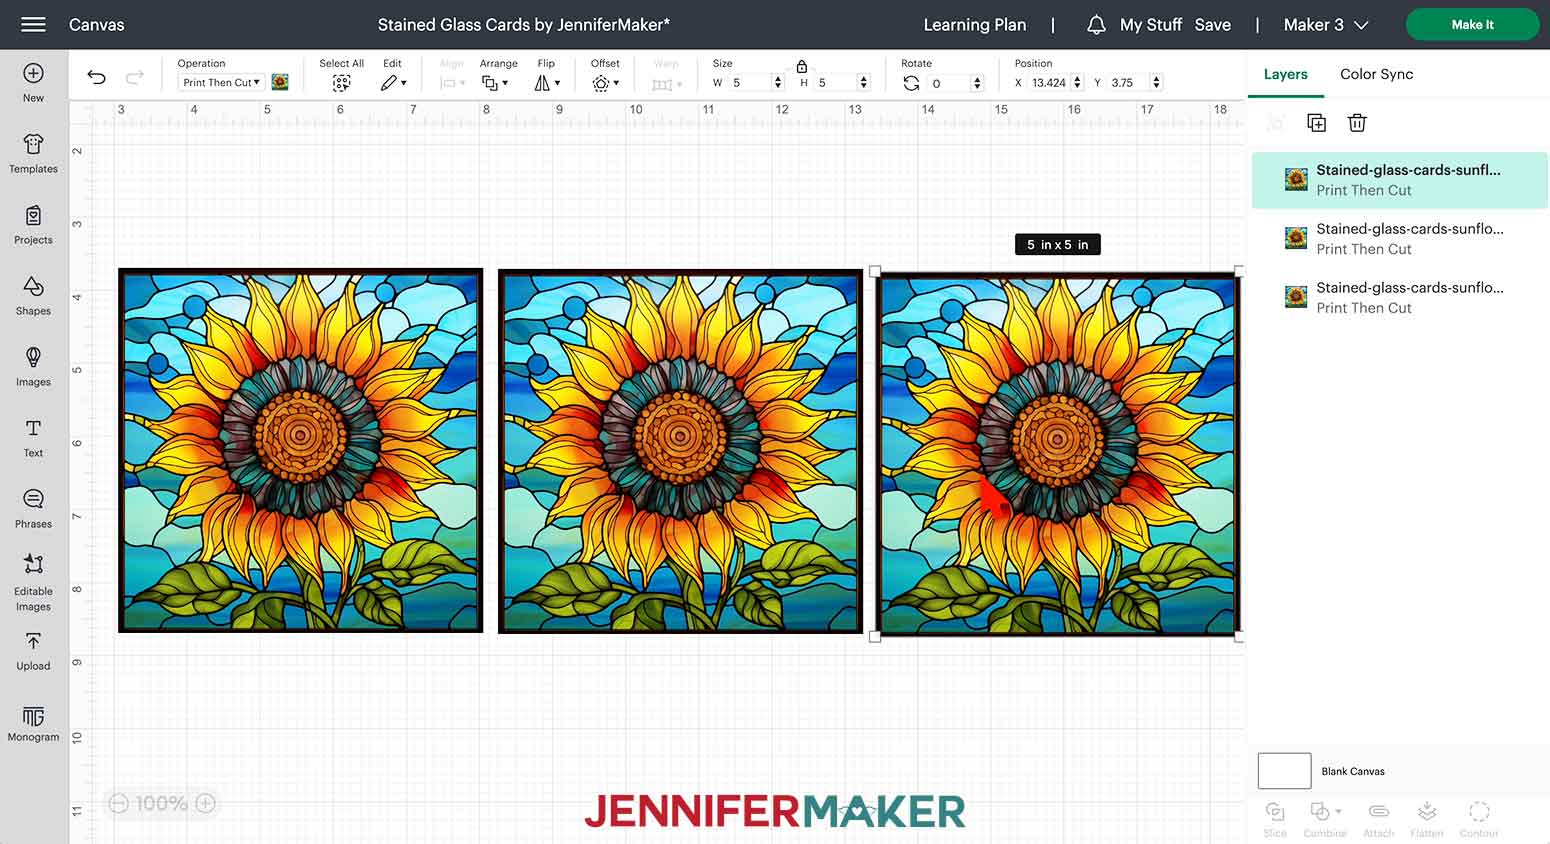 Click and drag the duplicate designs next to the original to display three identical designs on the canvas.